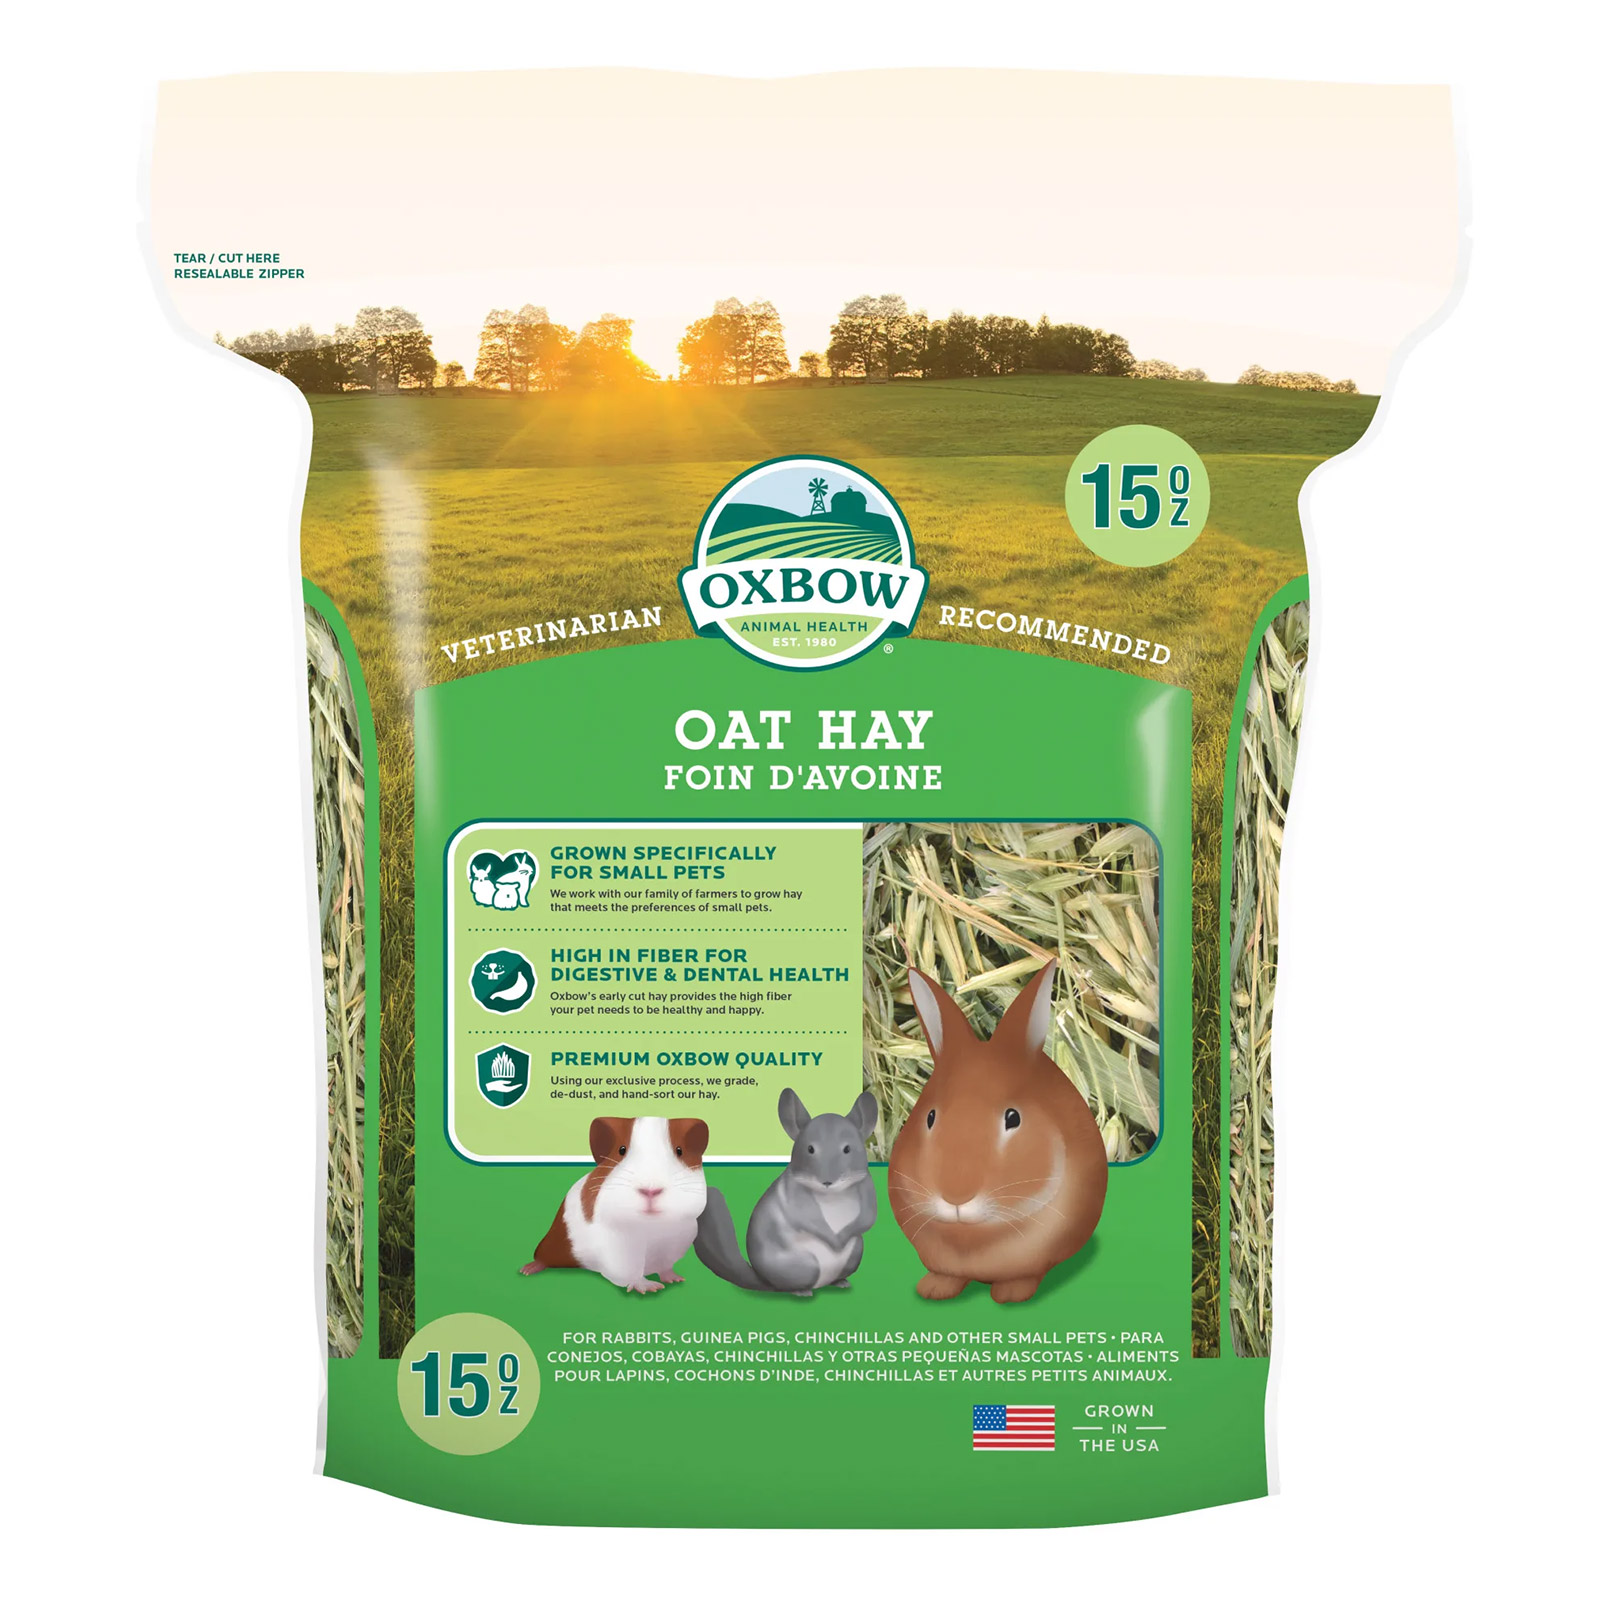 Oxbow Oat Hay for Food